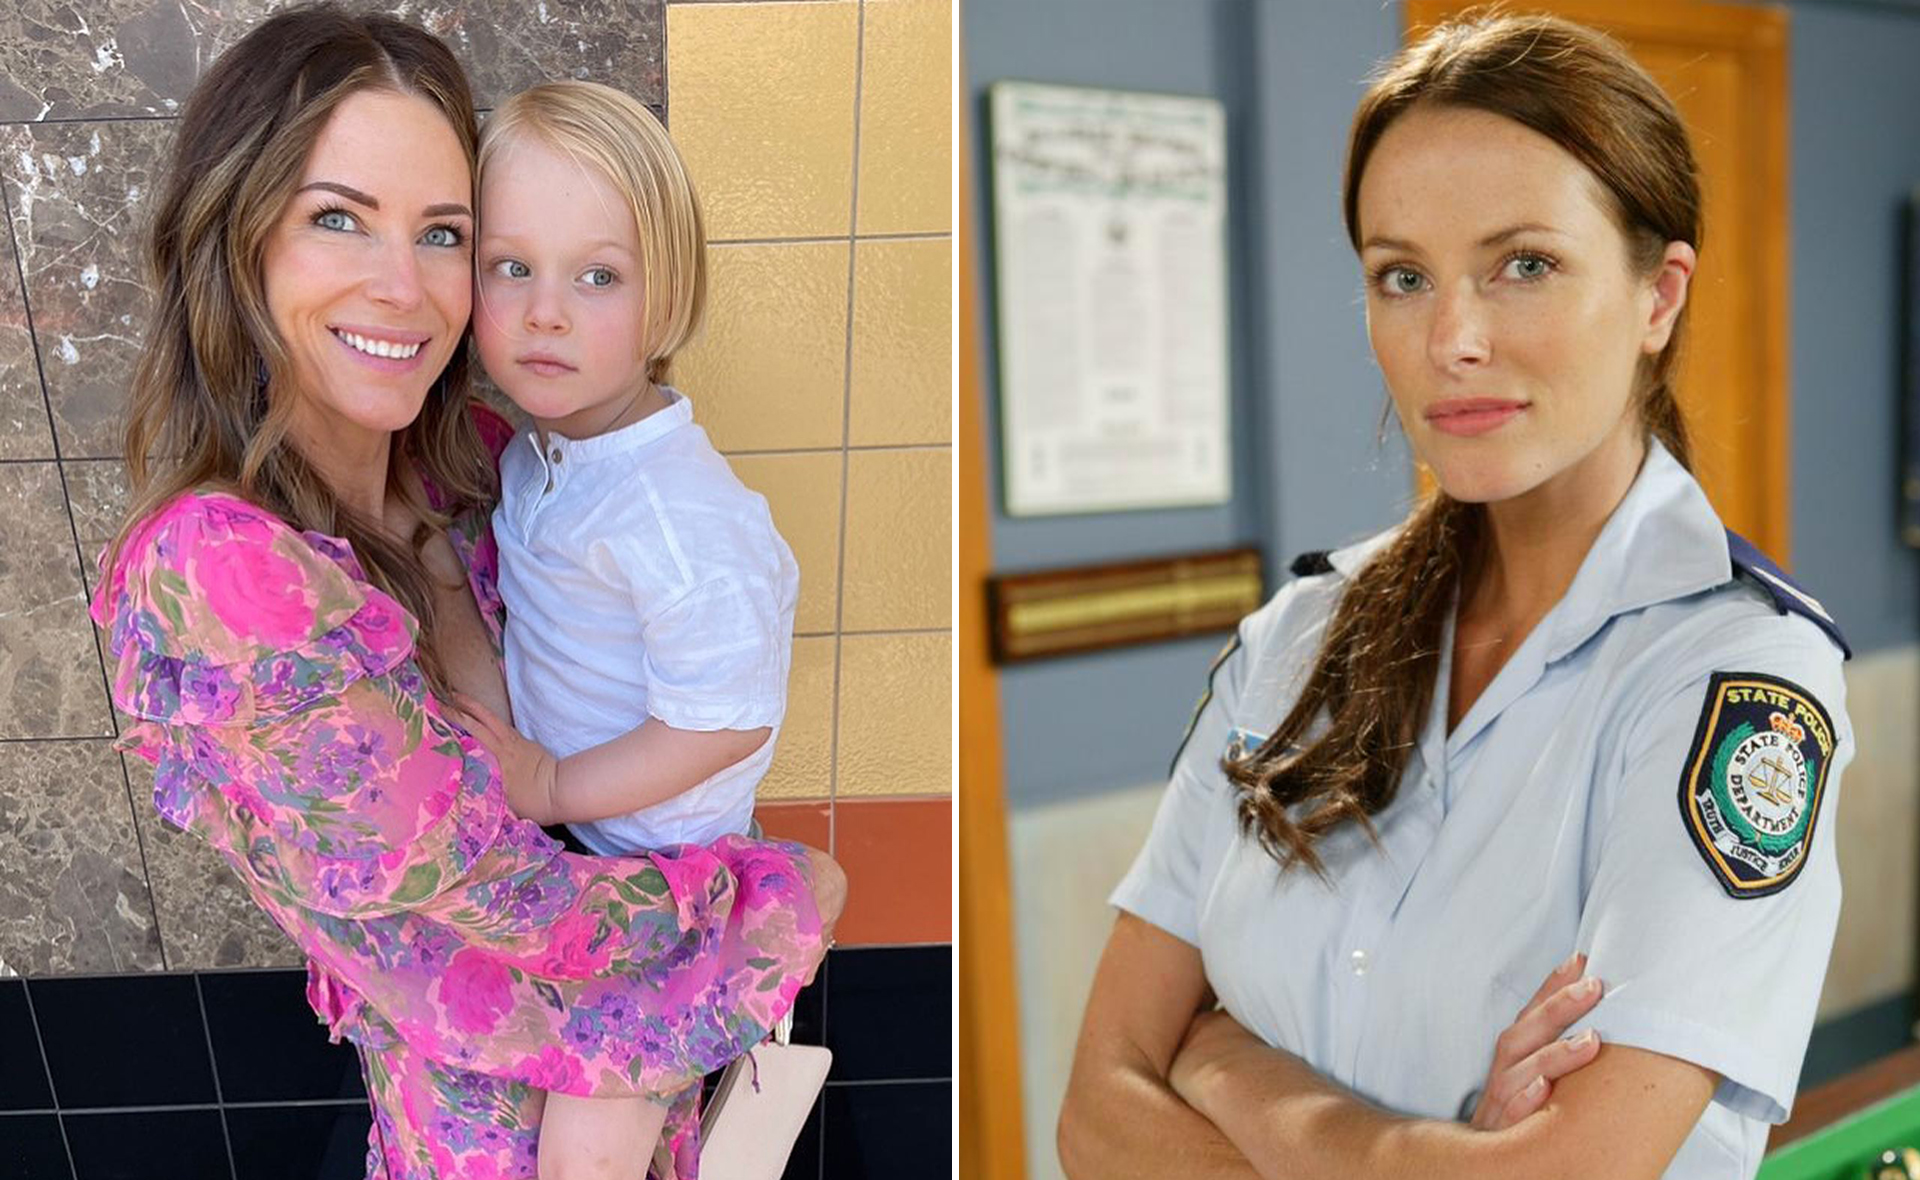 “You are the brightest light in my world”: Home and Away alum Esther Anderson has the sweetest bond with her son Forest